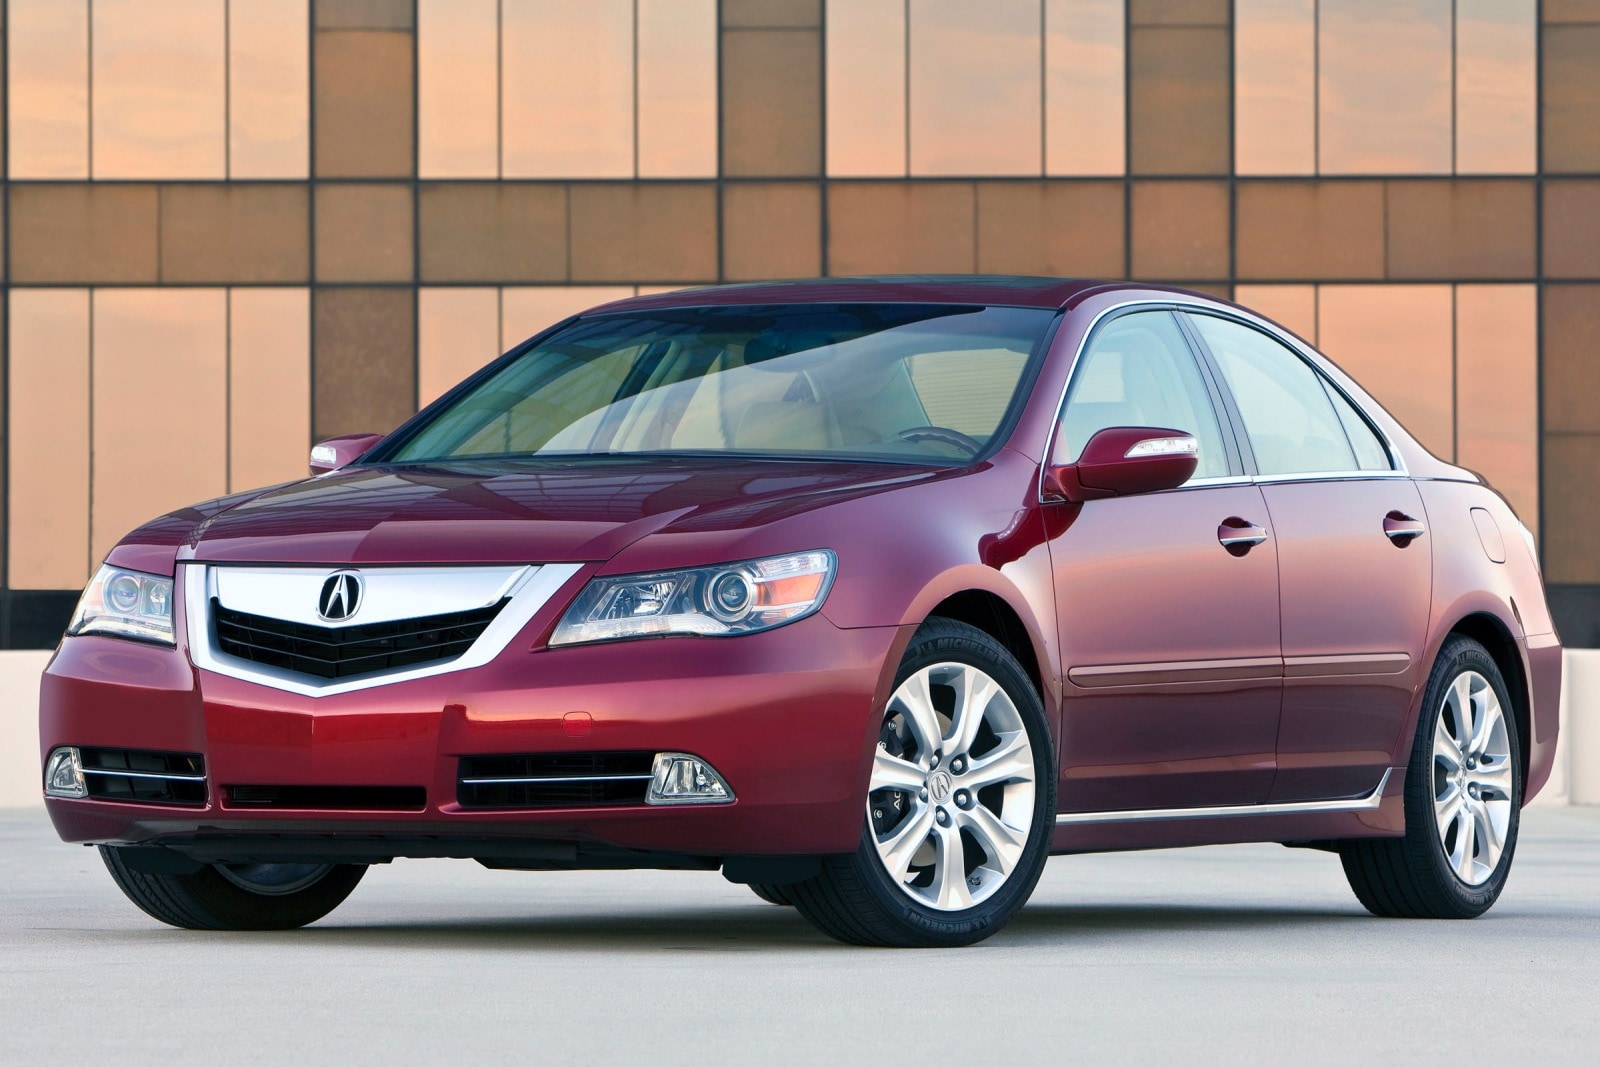 2010 Acura RL Review & Ratings | Edmunds